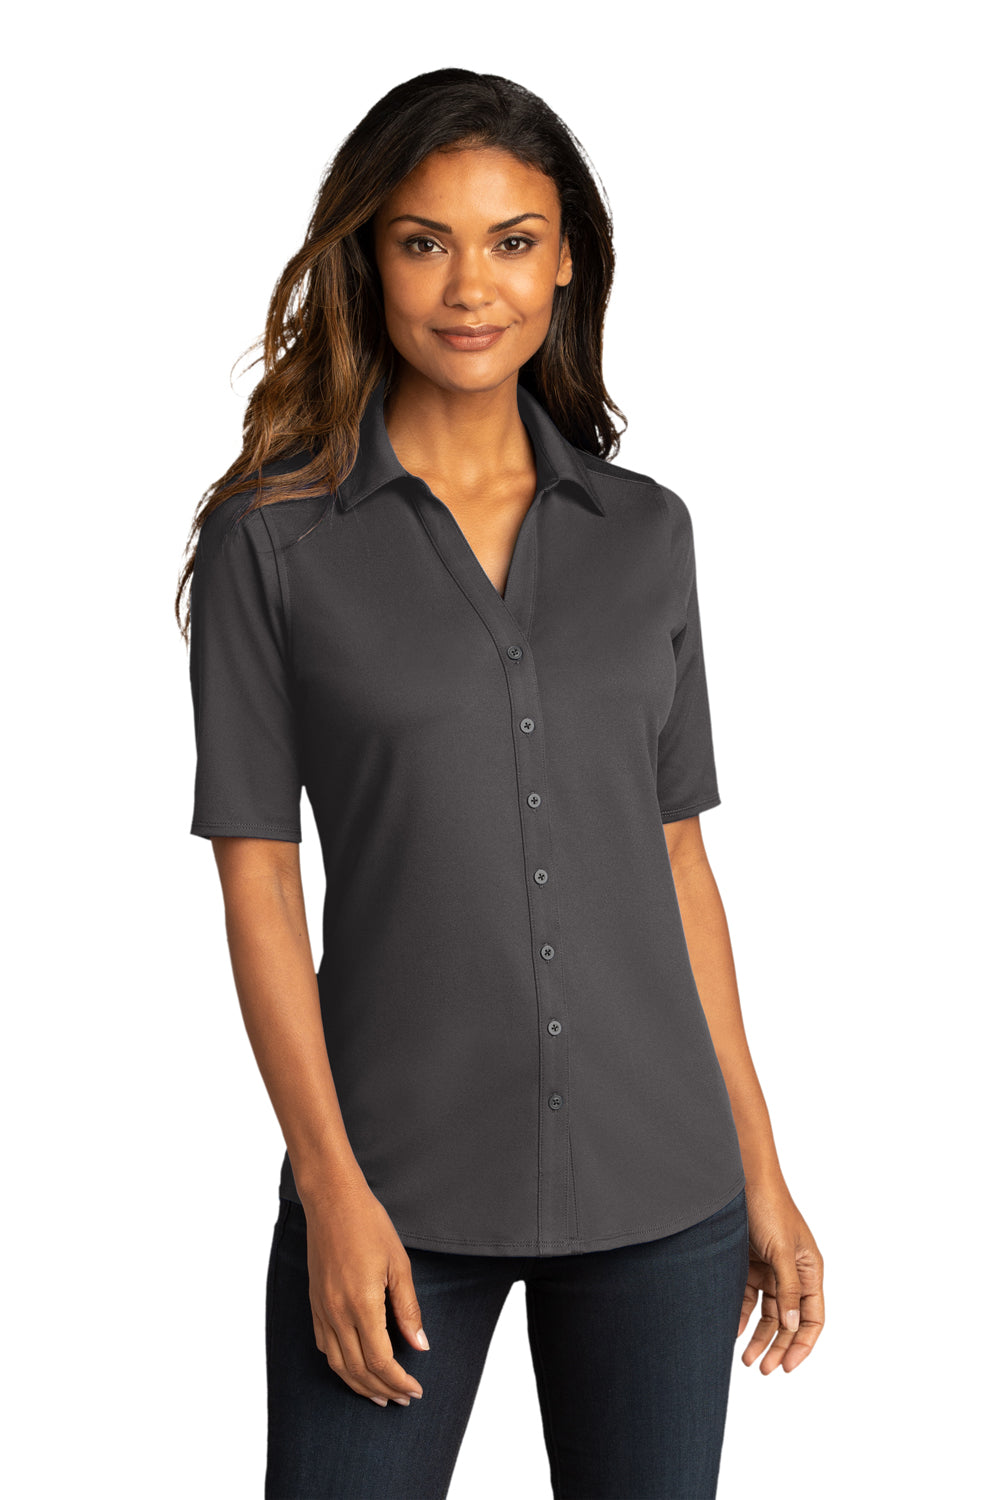 Port Authority Womens City Stretch Short Sleeve Button Down Shirt Graphite Grey Front